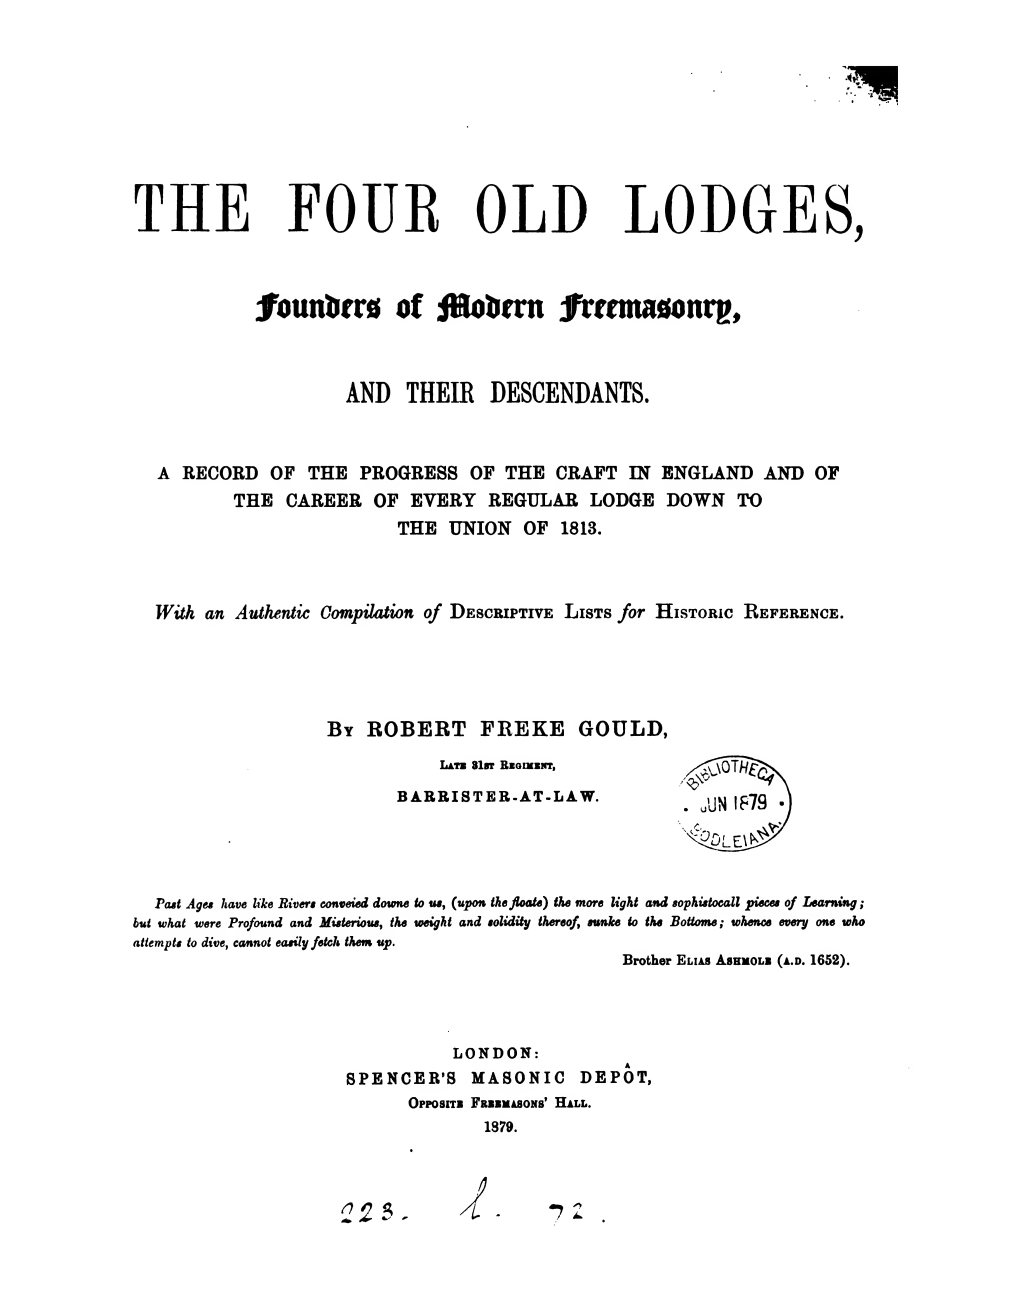 The Four Old Lodges—Preston's Account of 18 18 Superoeasion of Four Old Lodges 36 47